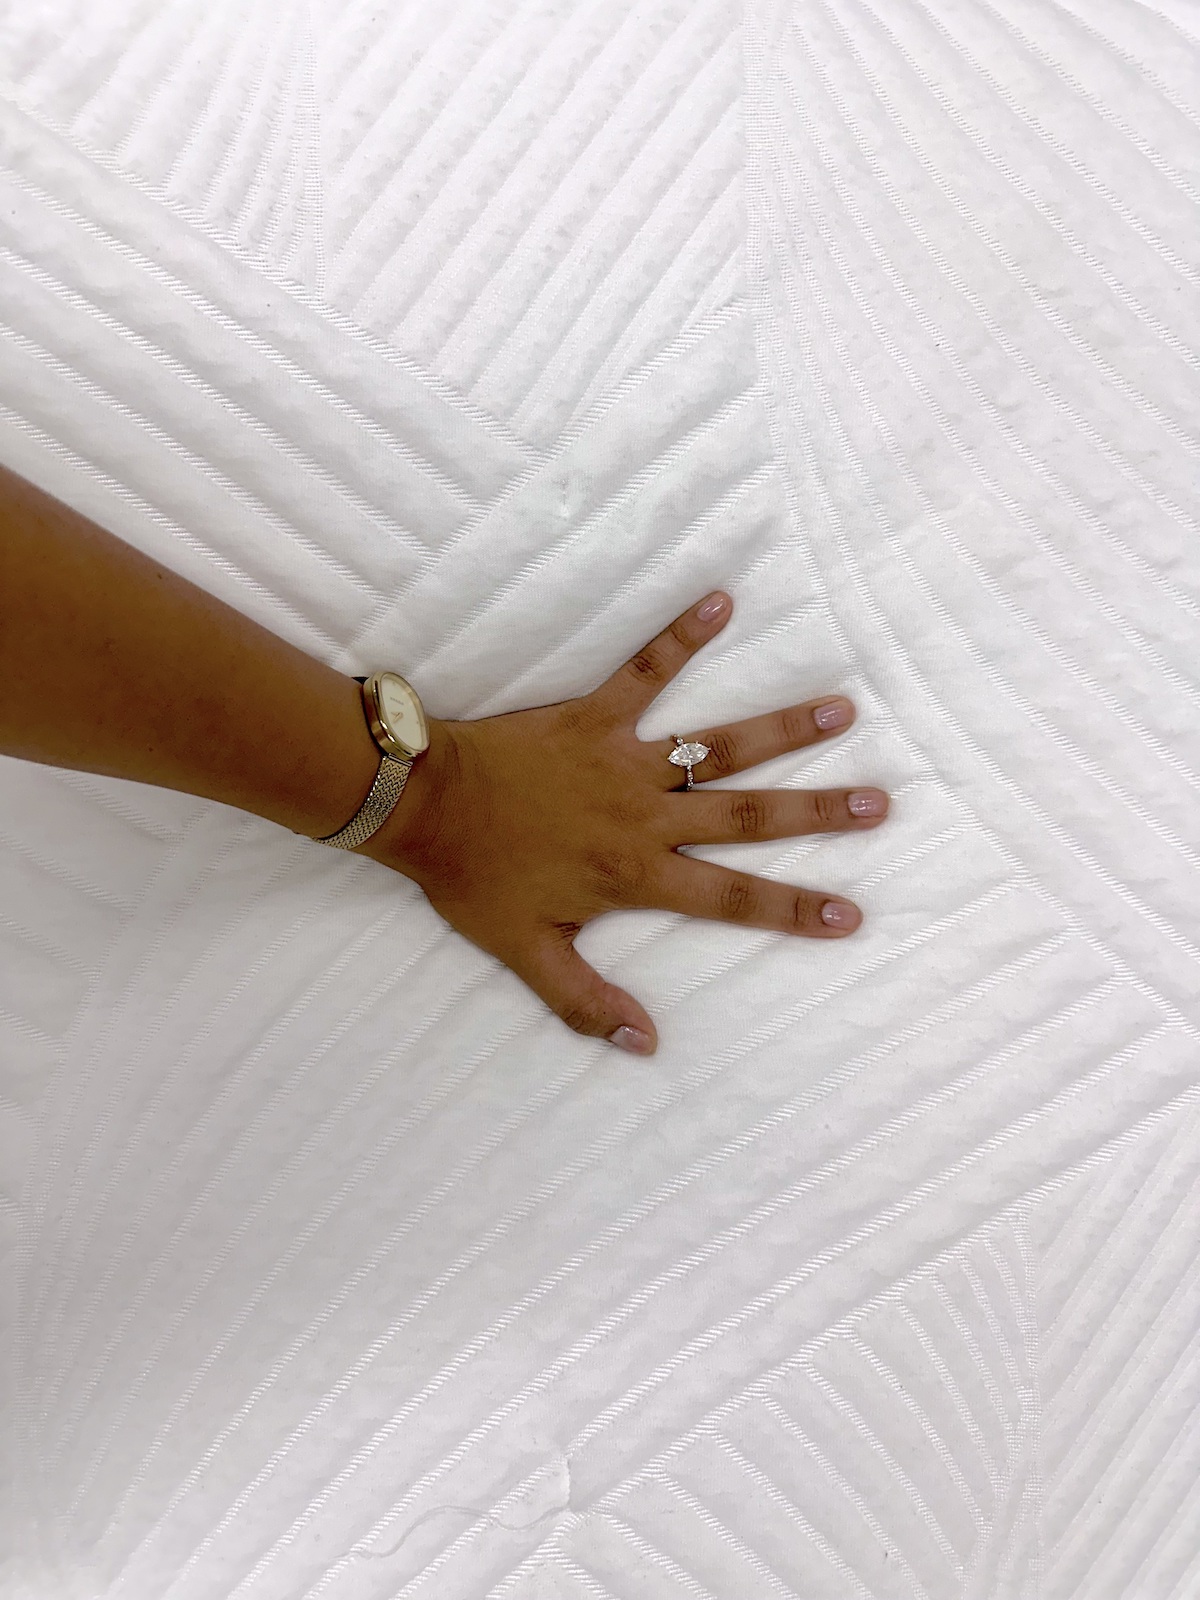 A hand wearing a watch and a ring is pressed against an organic mattress with a white textured surface.